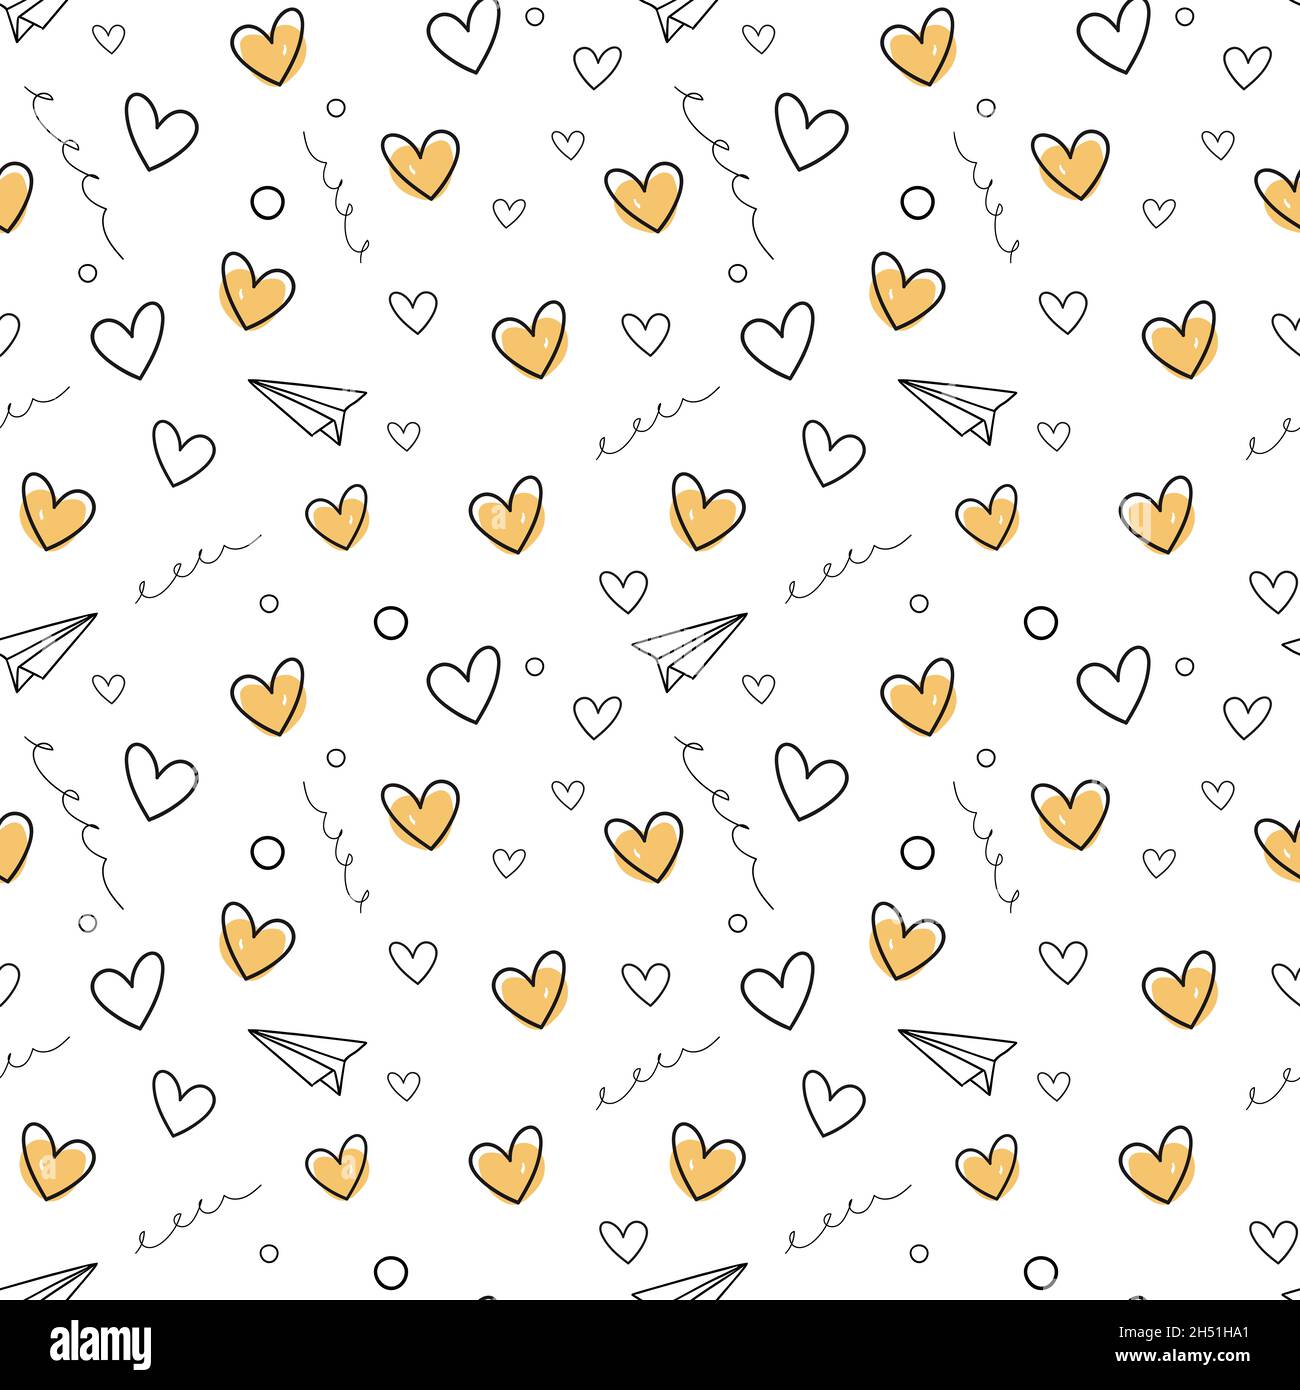 Hand drawn hearts and paper planes seamless vector pattern. Hearts doodle Stock Photo